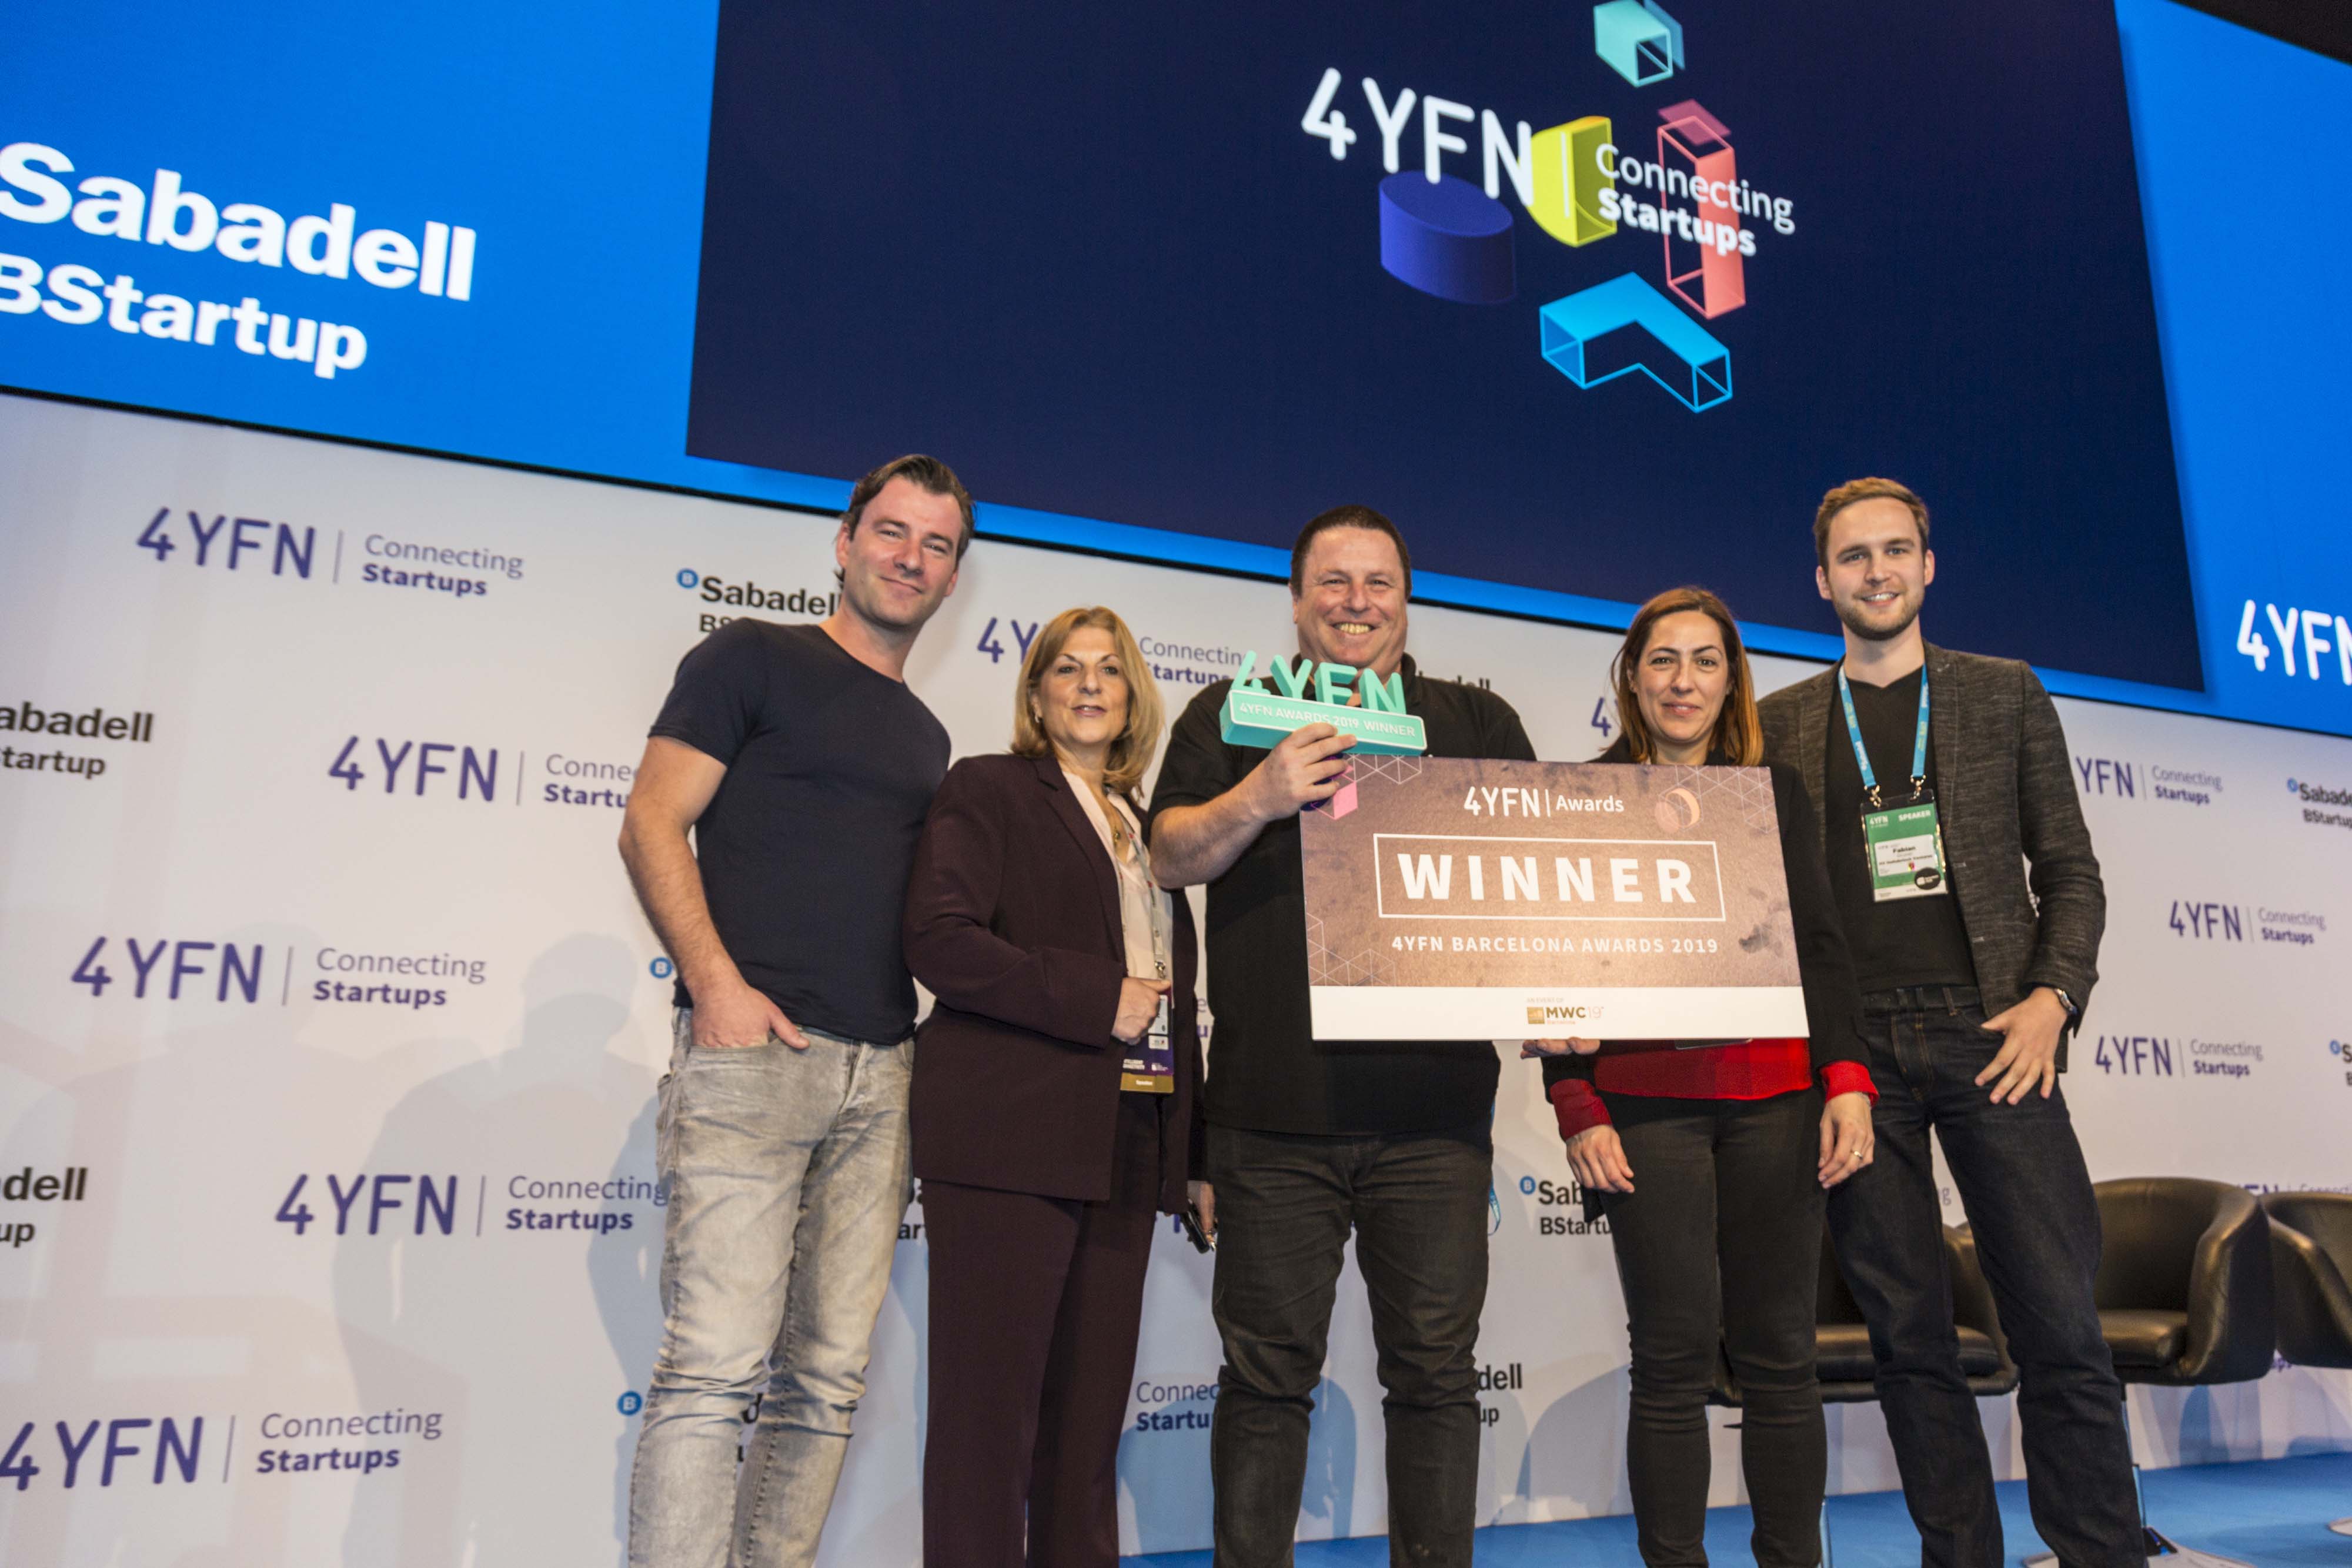 military drone jammer tools | IoT Device Security Startup NanoLock Wins GSMA’s 4YFN Competition